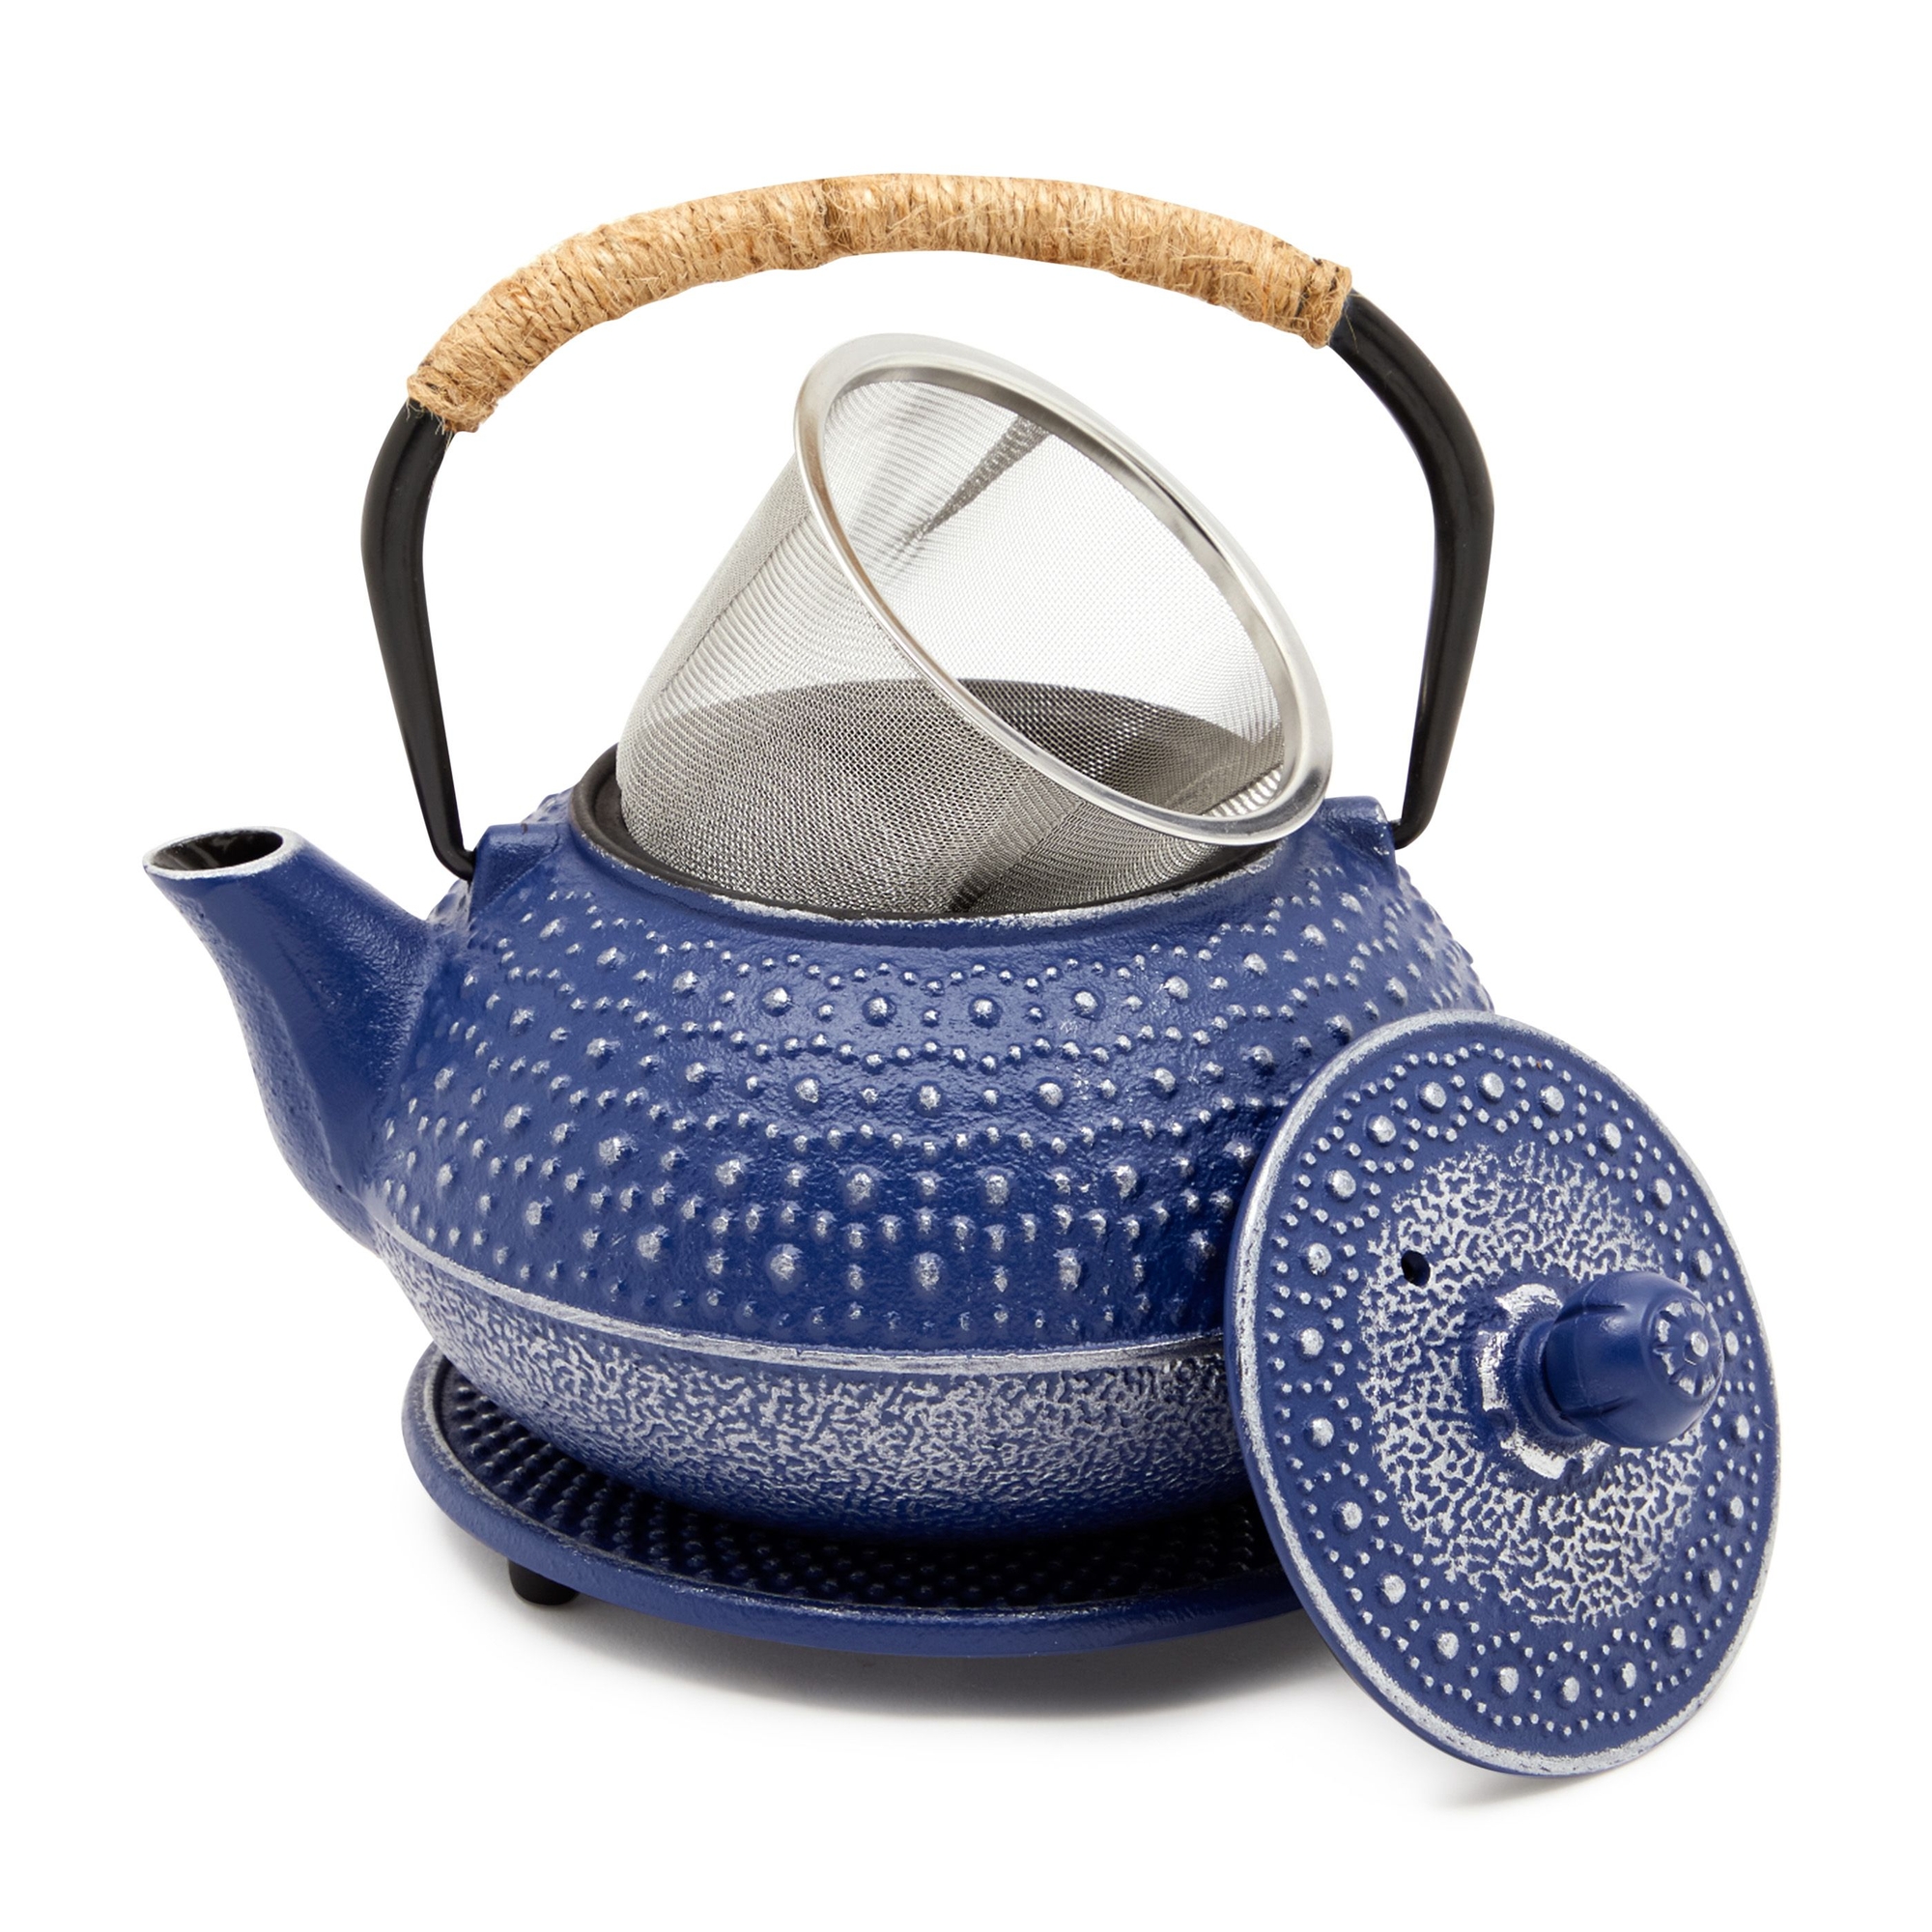 Cast Iron Teapot with Infuser - Japanese Tea Kettle, Loose Leaf Tetsubin with Handle and Trivet (Blue, 3 Pcs, holds 27 oz, 800 ml) - image 1 of 10